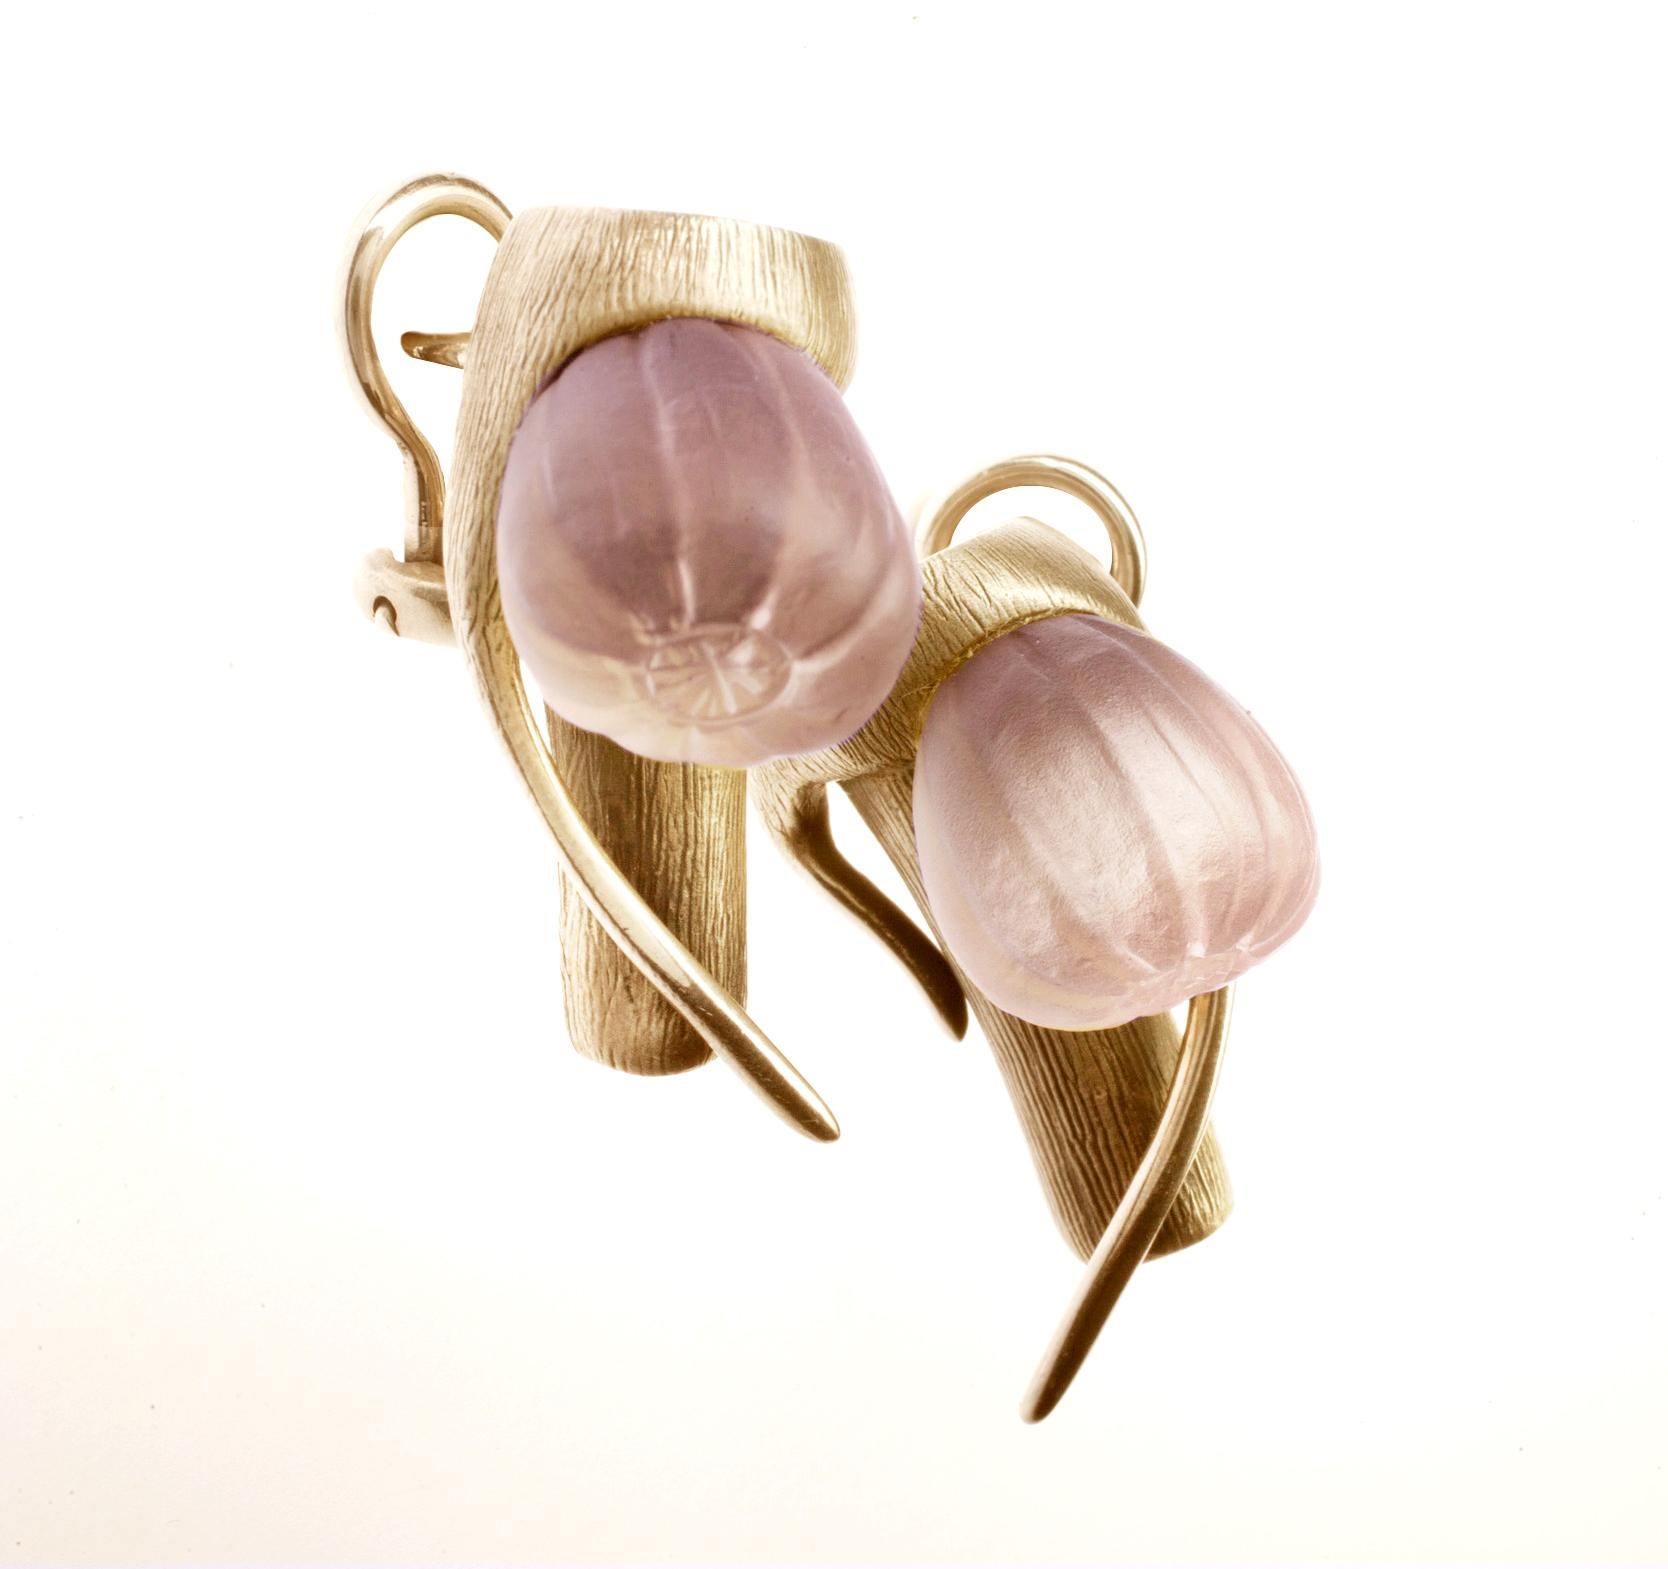 These contemporary Fig cocktail earrings feature tender frosted rose onyx and are crafted from 14 karat rose gold. The collection was previously featured in a published issue of Harper's Bazaar UA editorial, and the earrings were chosen for the 64th